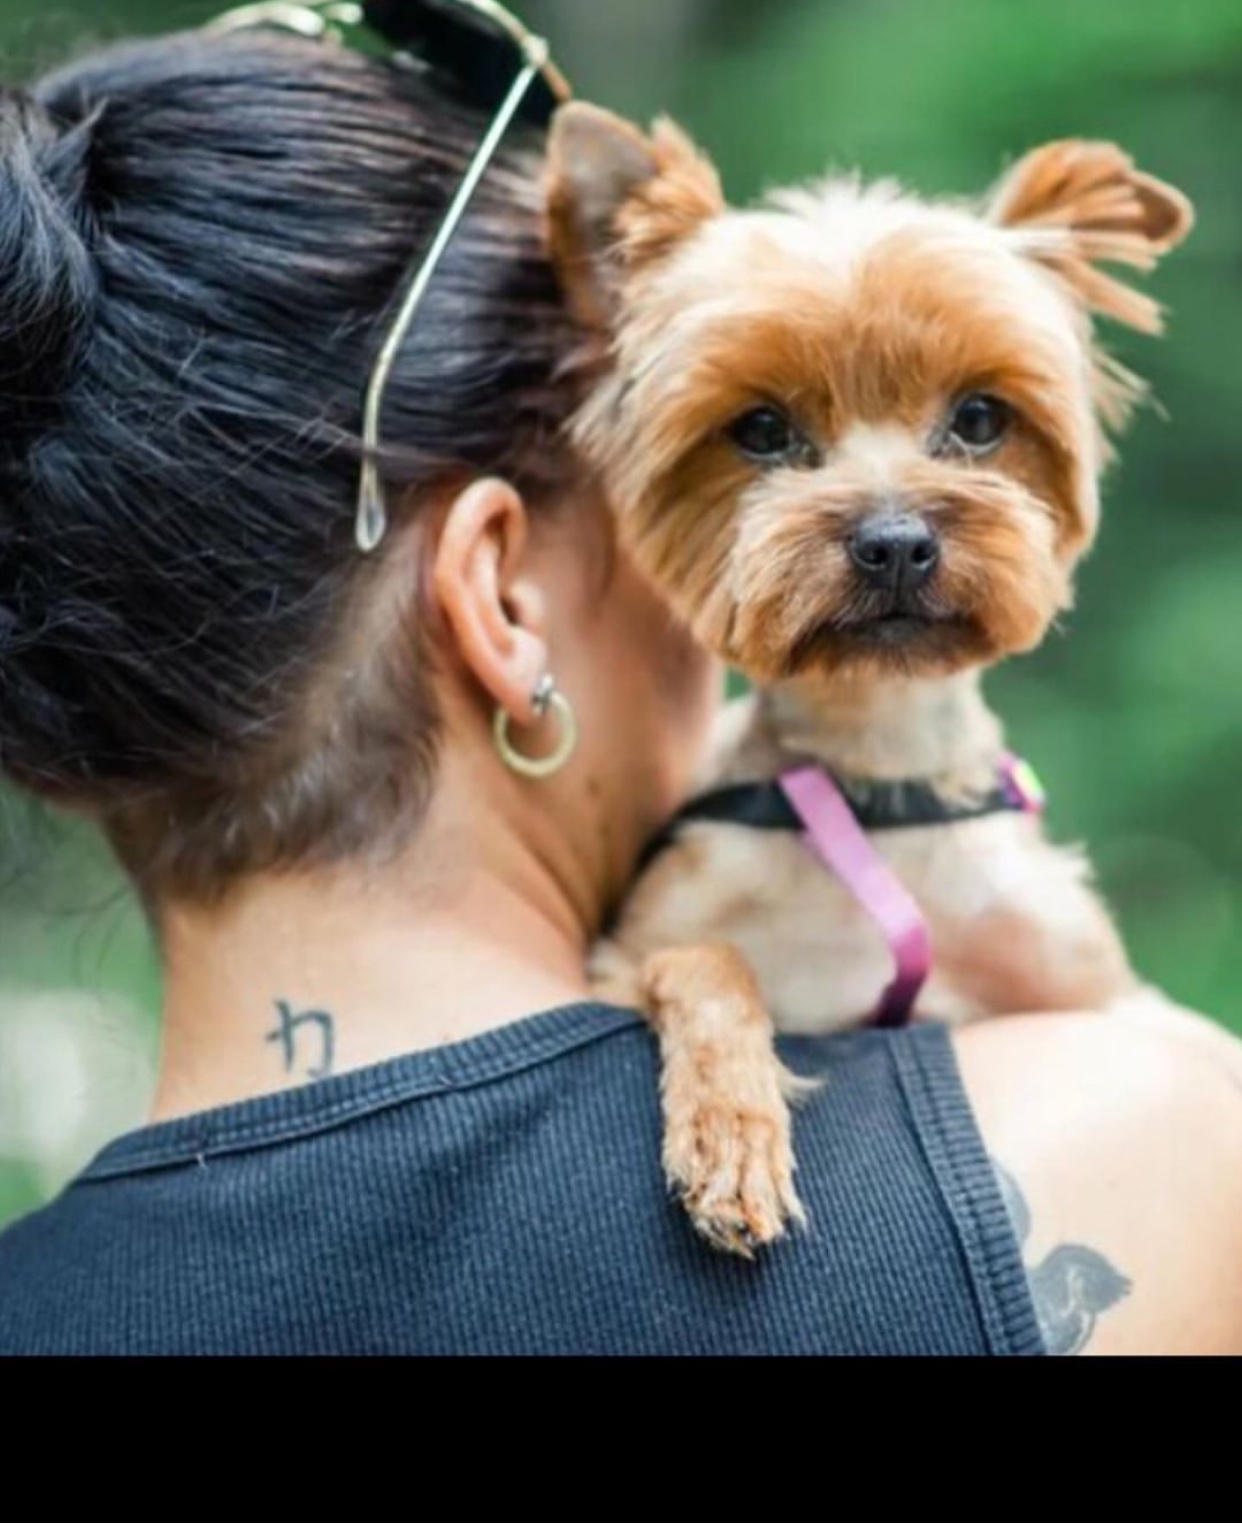 A woman carrying a Yorkshire Terrier